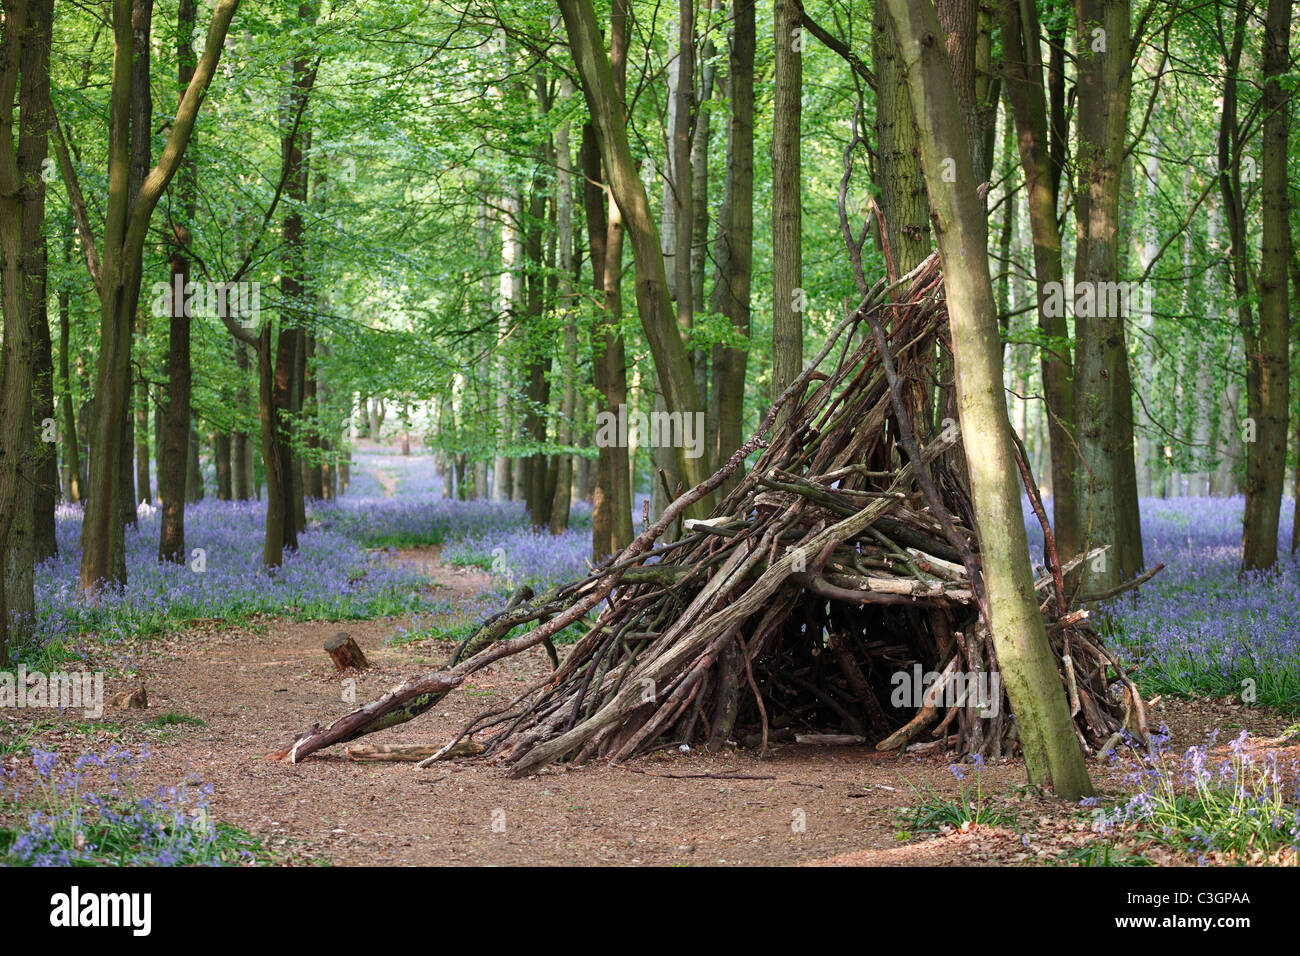 shelter-made-of-tree-branches-in-bluebell-forest-uk-C3GPAA.jpg